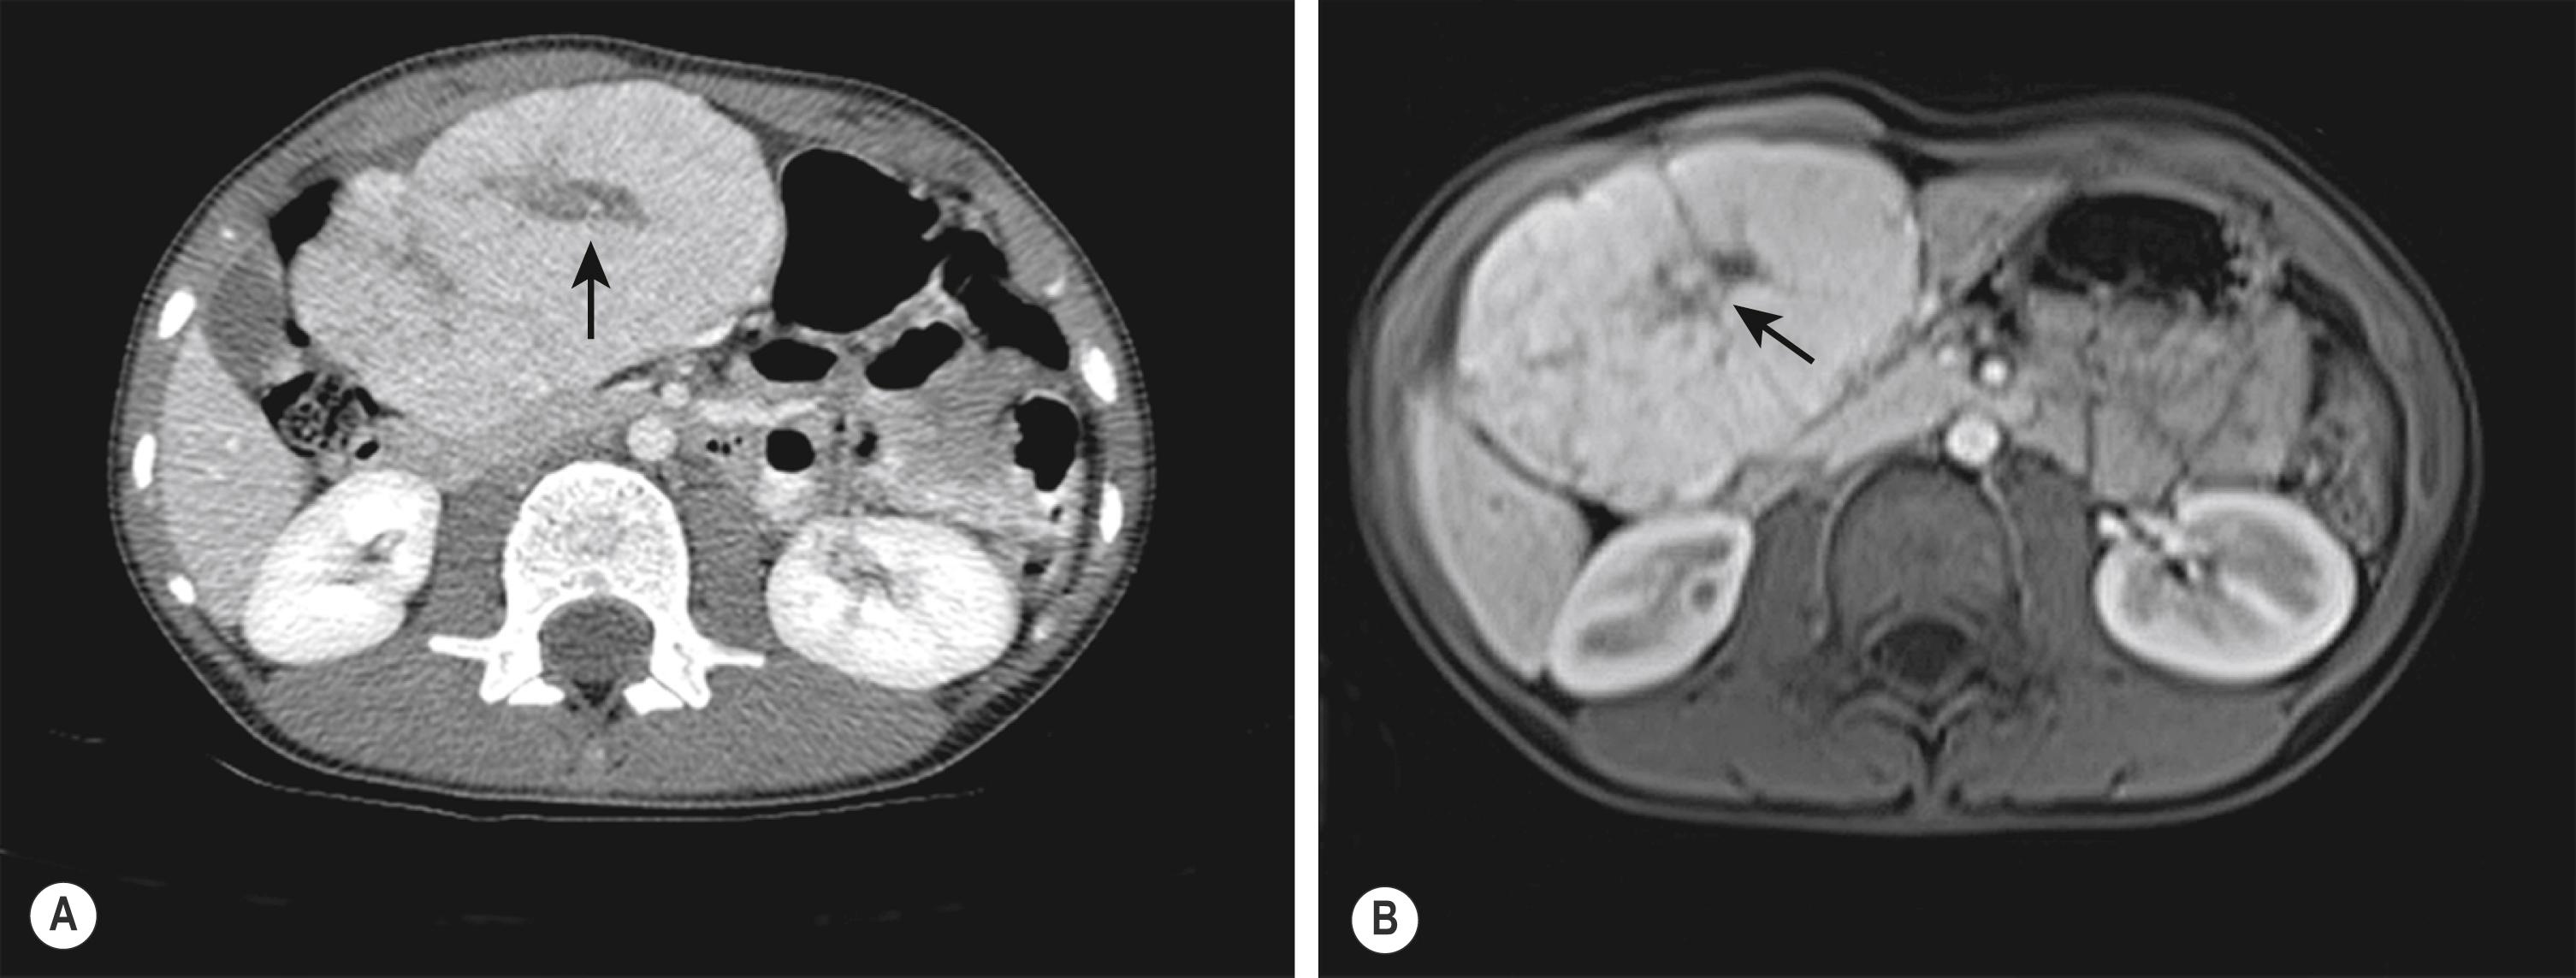 Fig. 66.7, CT scan after intravenous administration of contrast agent (A) and MRI with hepatocyte phase contrast (Eovist, T1, fat saturated) (B) show an early enhancing lesion in the right lobe with a hypodense central scar (arrows) consistent with focal nodular hyperplasia.